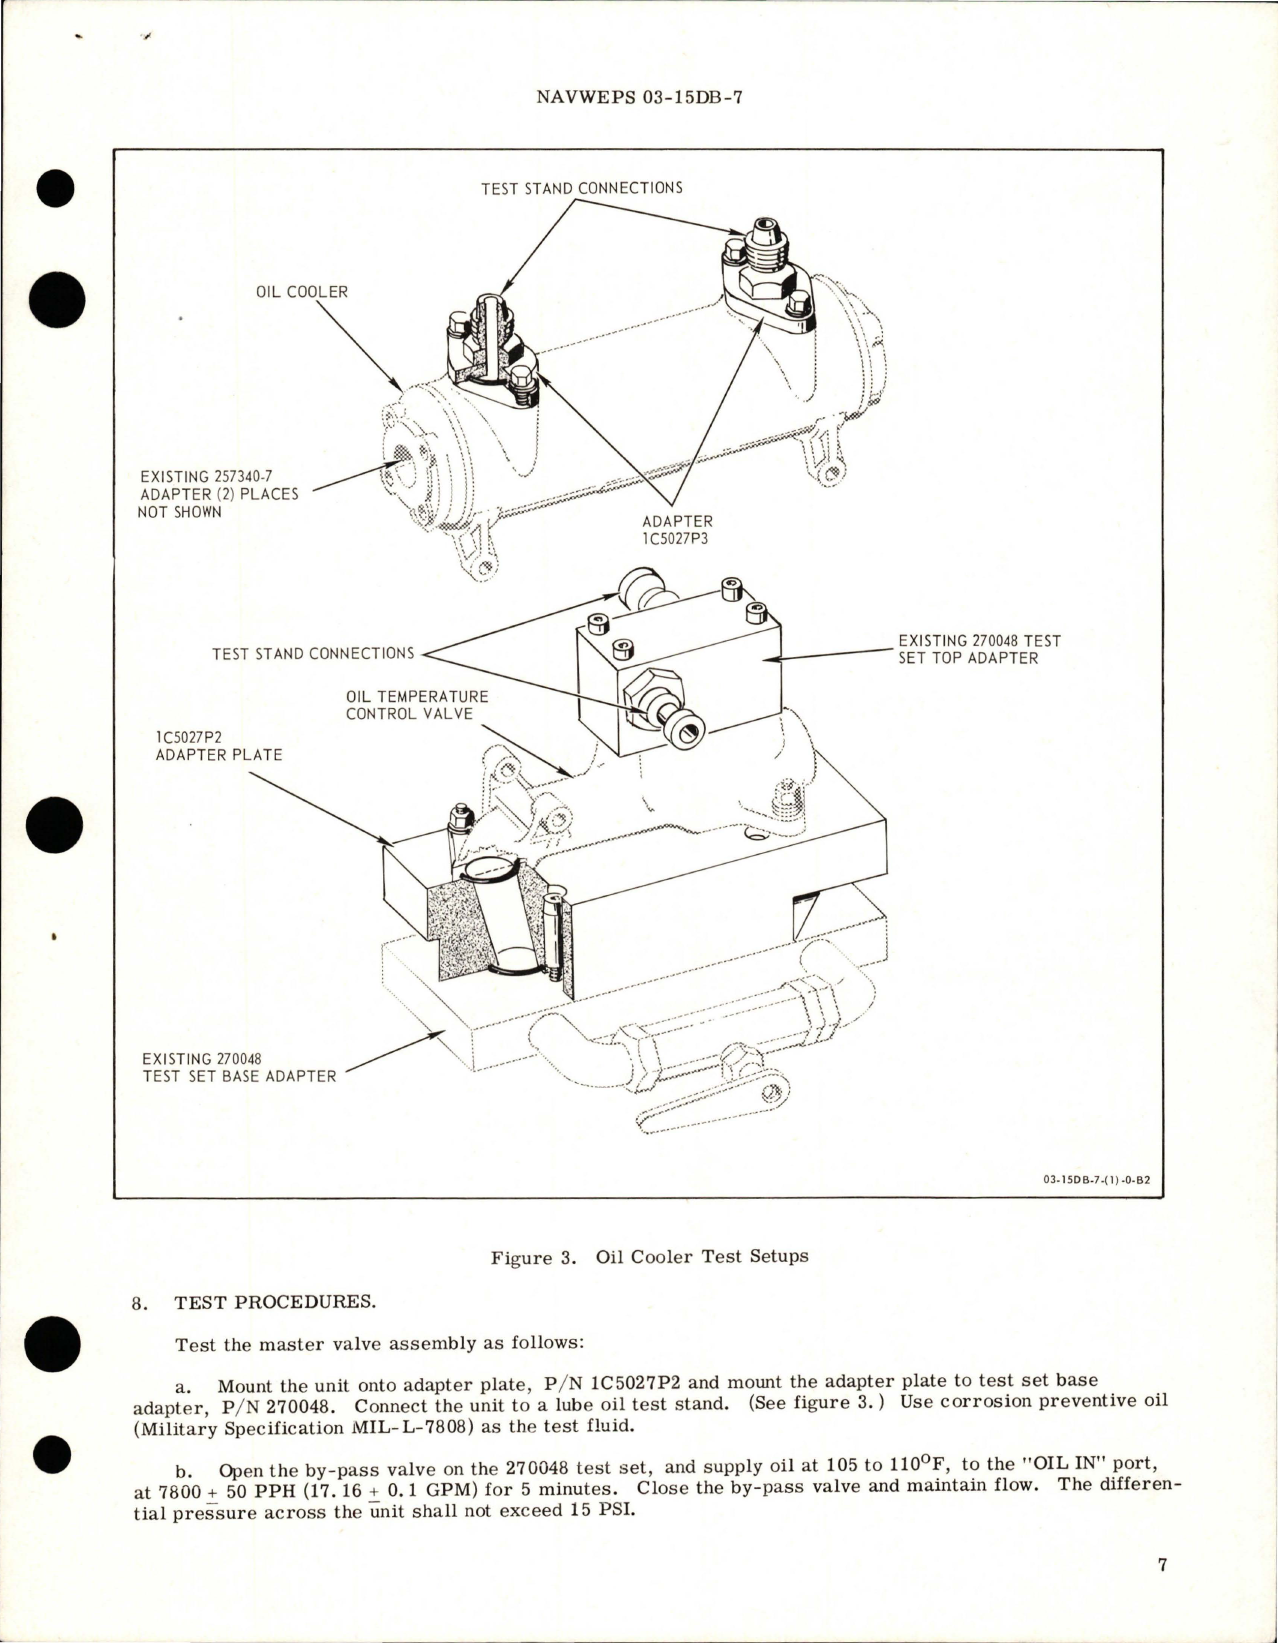 Sample page 7 from AirCorps Library document: Overhaul Instructions with Parts Breakdown for Main and Afterburner Oil Cooler - Part UA526976-4